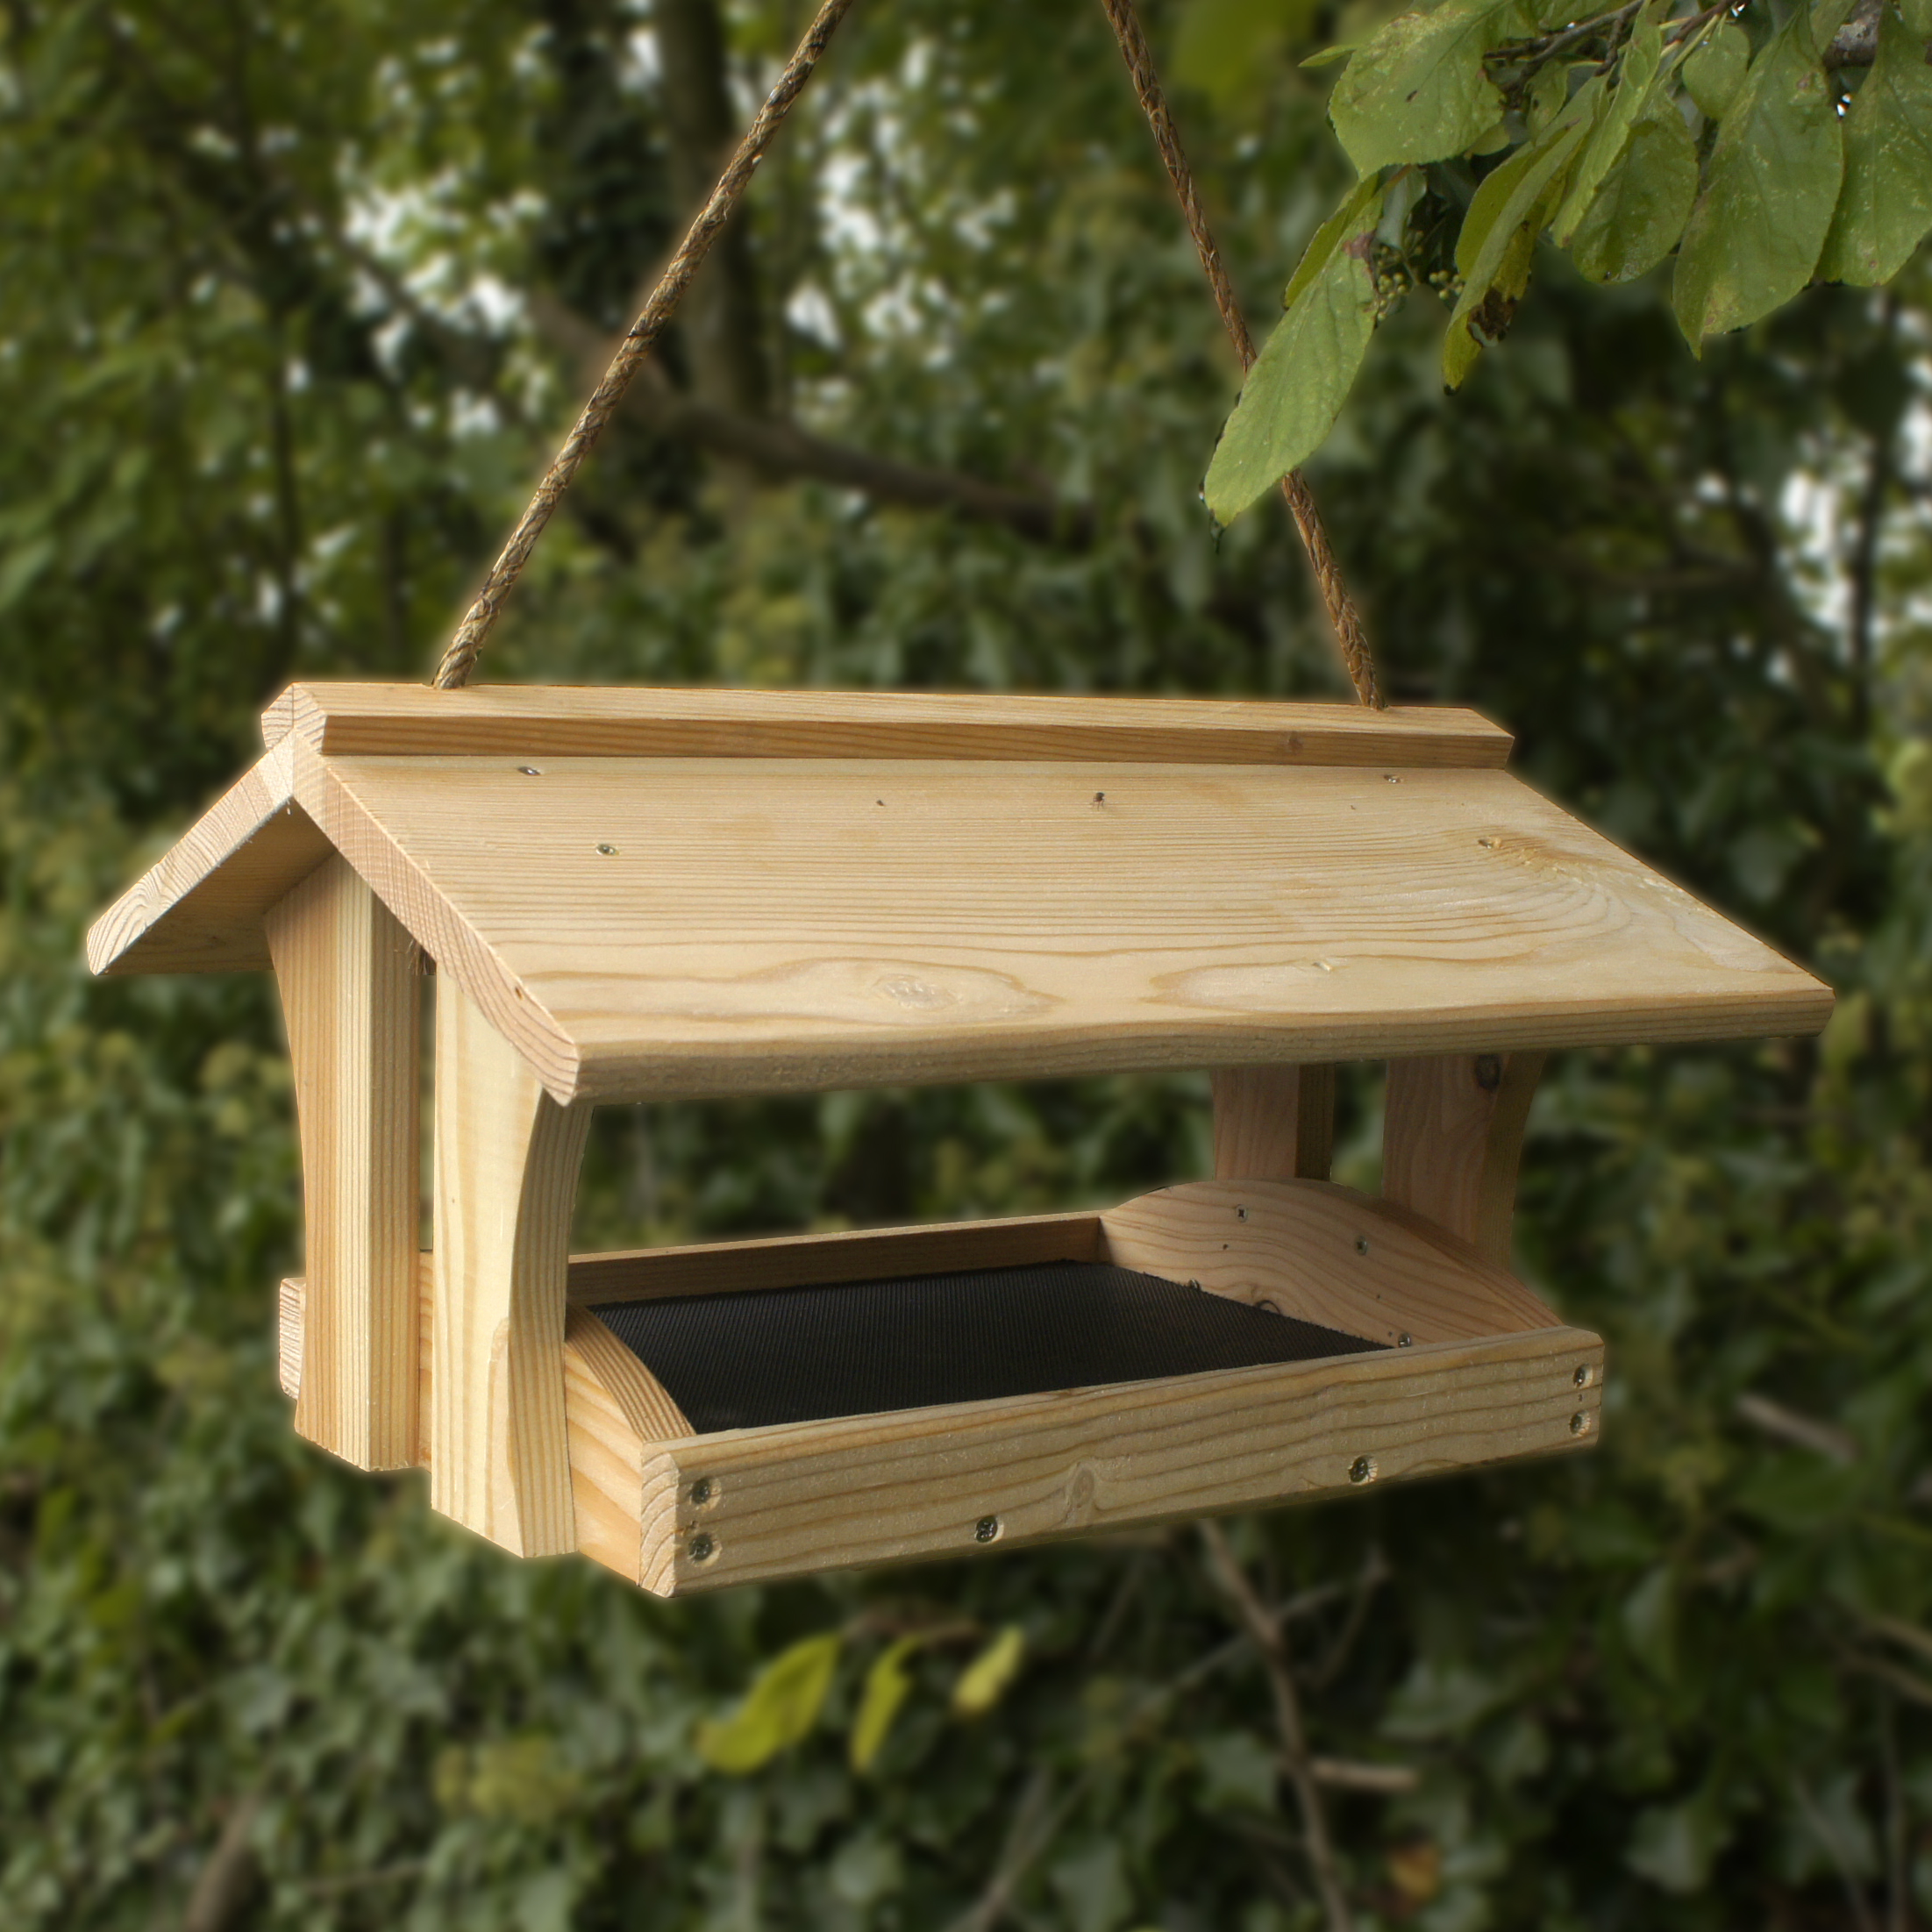 How To Build A Simple Bird Table Pictures to pin on Pinterest